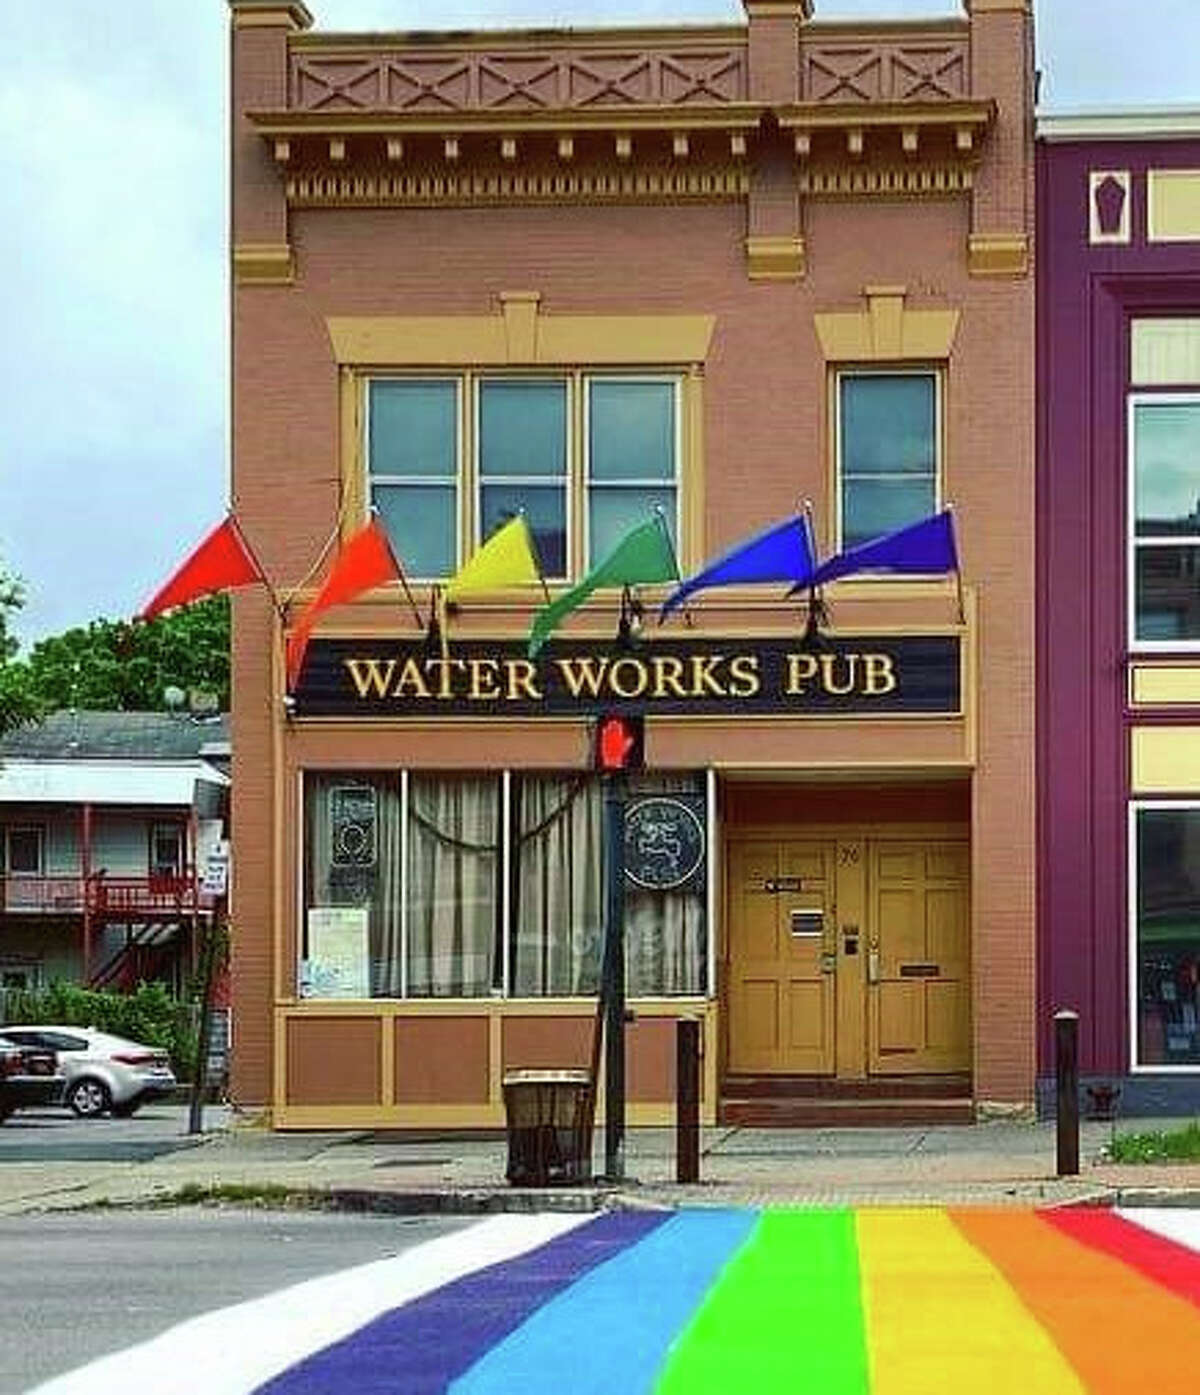 Waterworks Pub in Albany expects to require proof of coronavirus vaccination for admission to it second-floor dance club but will allow all at socially distanced tables in the street-level bar area, according to manager Scott Levine. (Provided photo.)